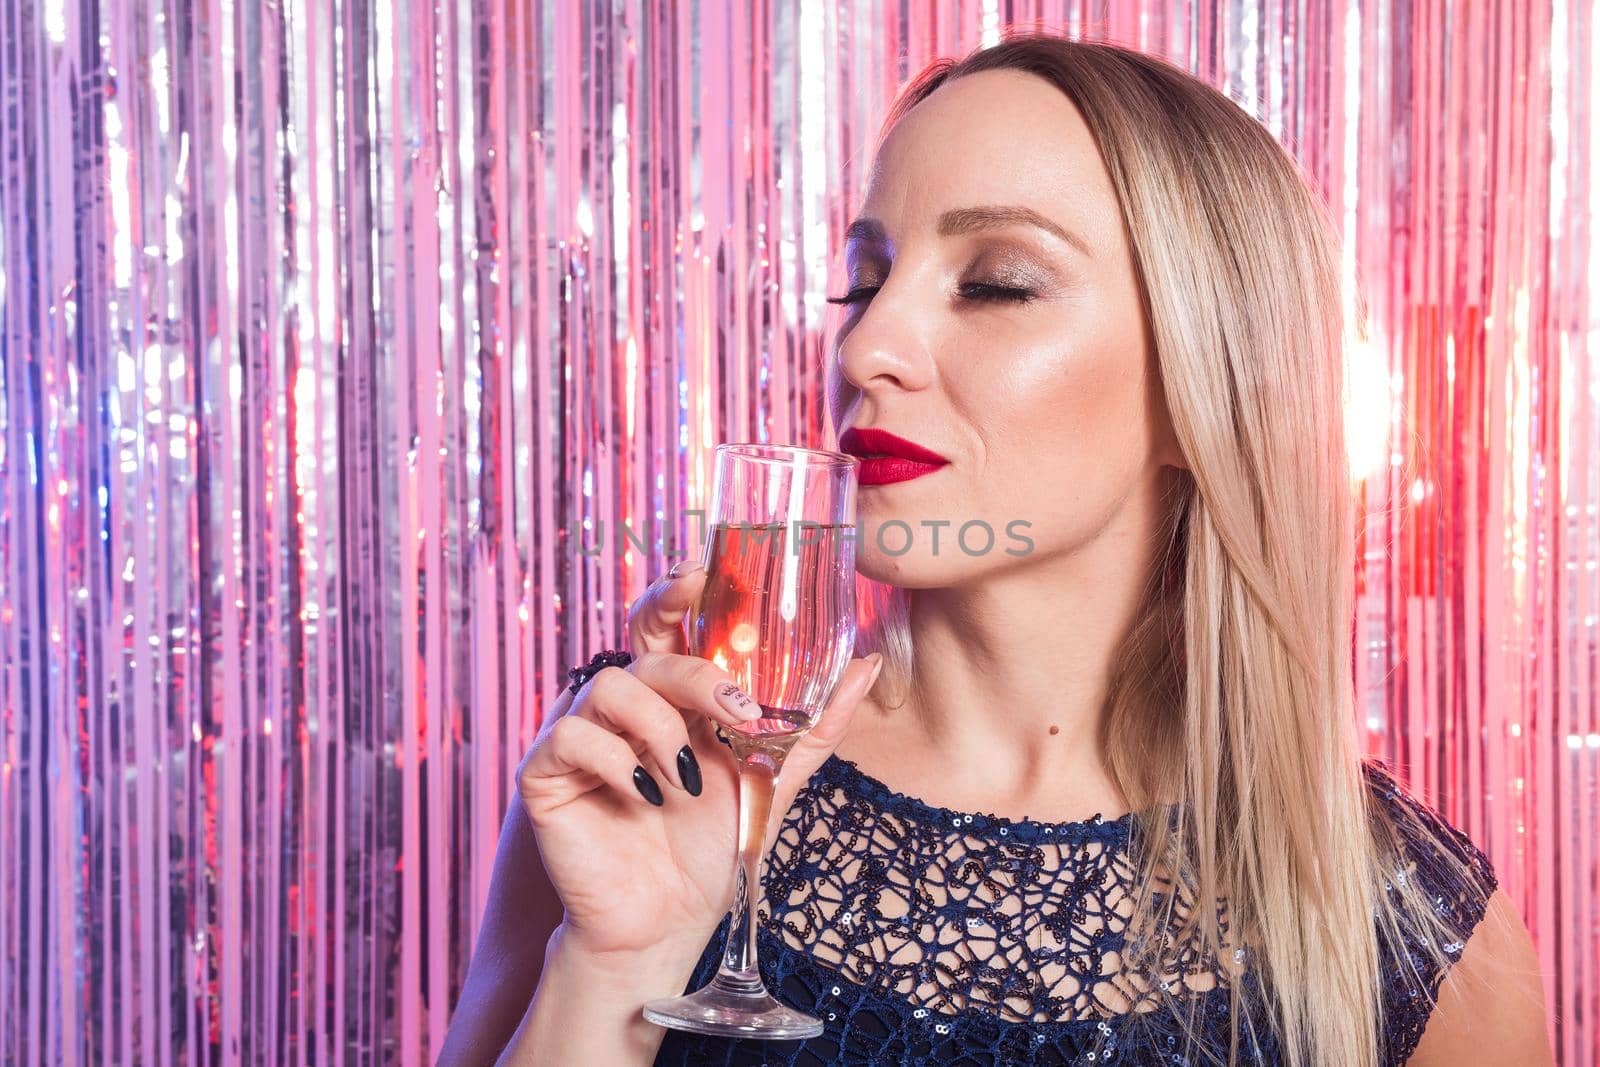 Party, drinks, holidays and celebration concept - smiling woman in evening dress with glass of sparkling wine over shiny background. by Satura86